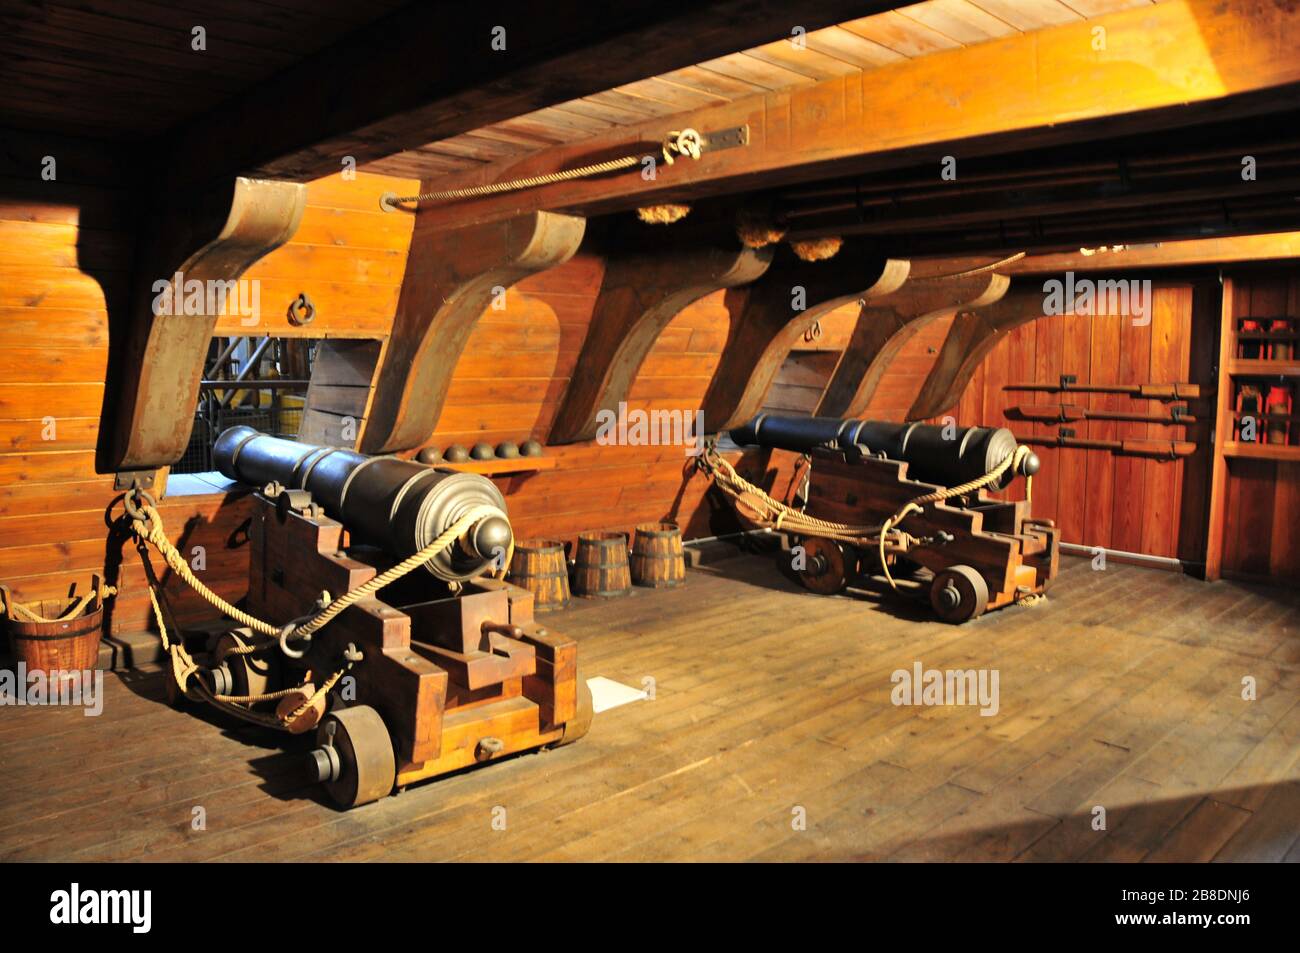 Particular of old cannons Stock Photo